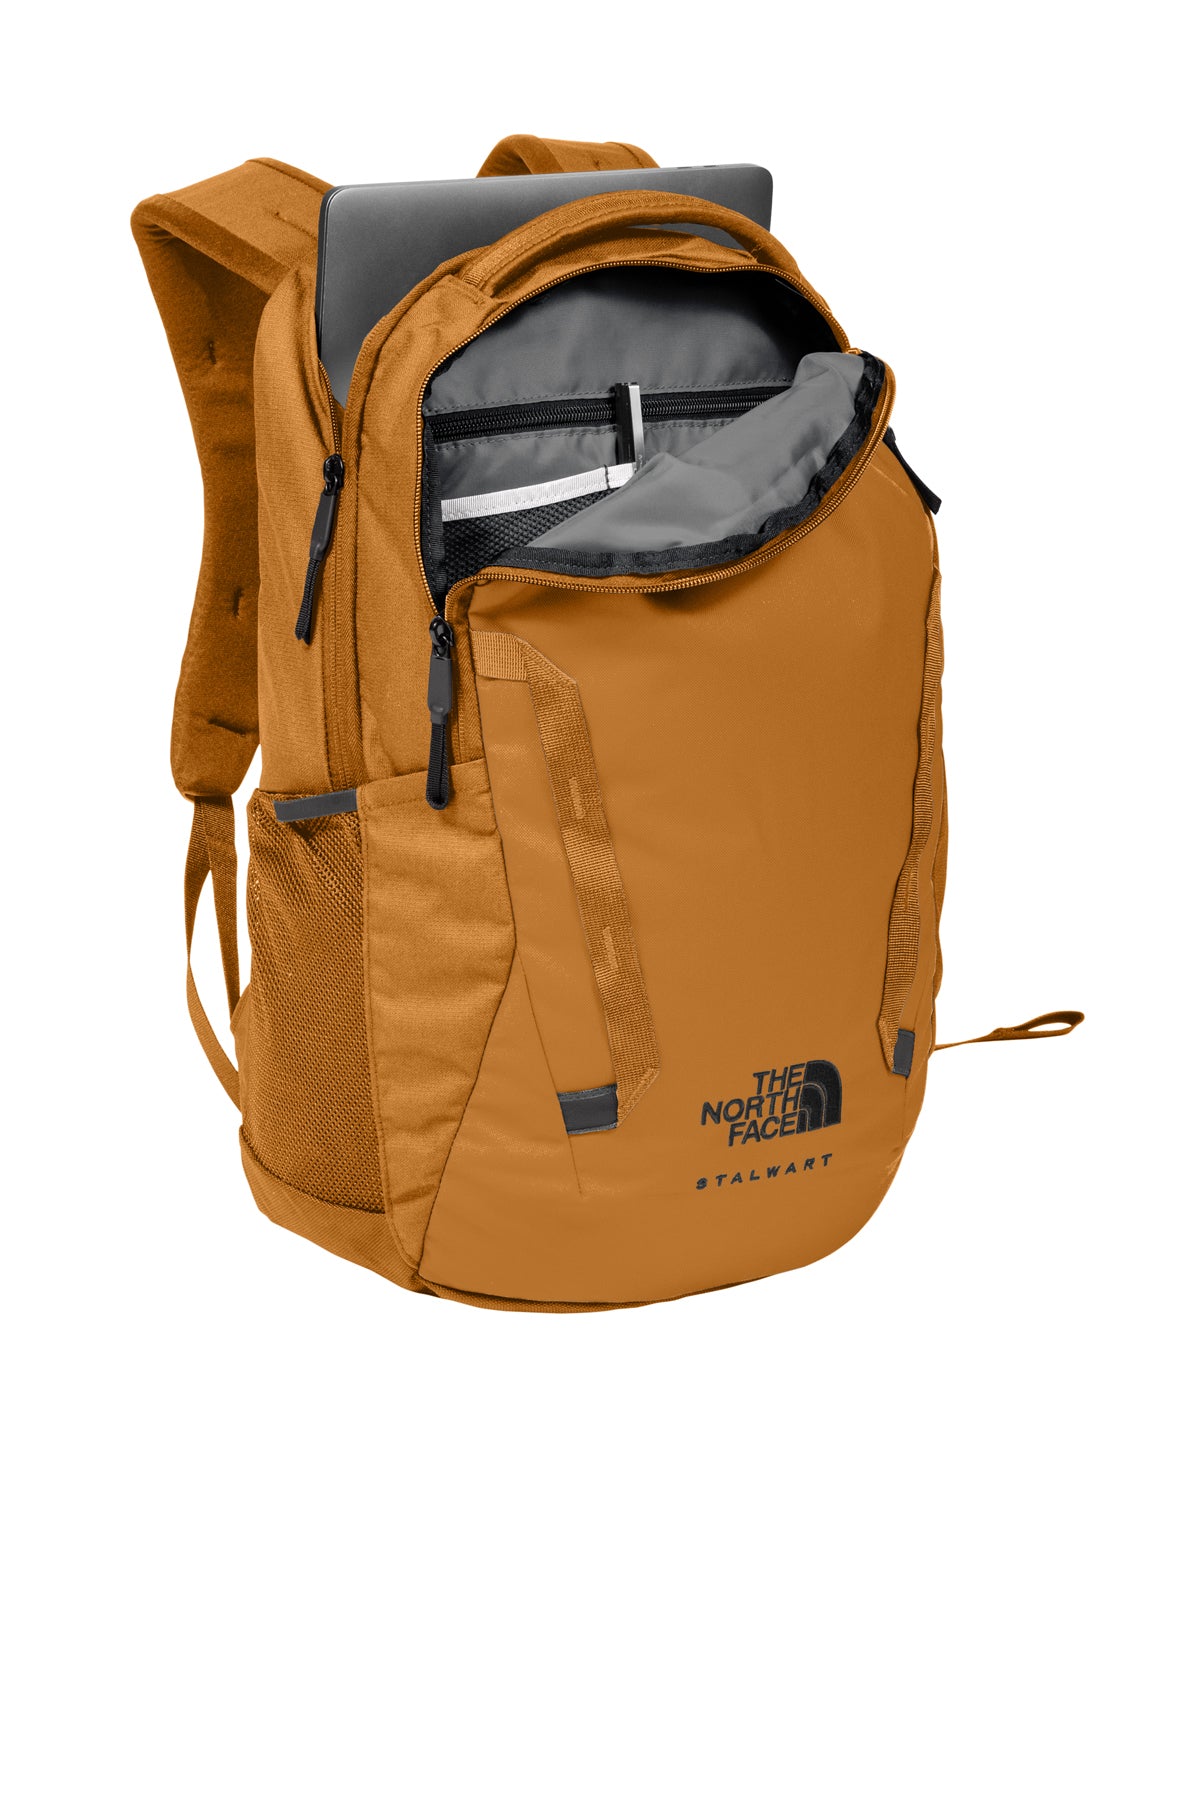 The North Face Stalwart Backpack-3